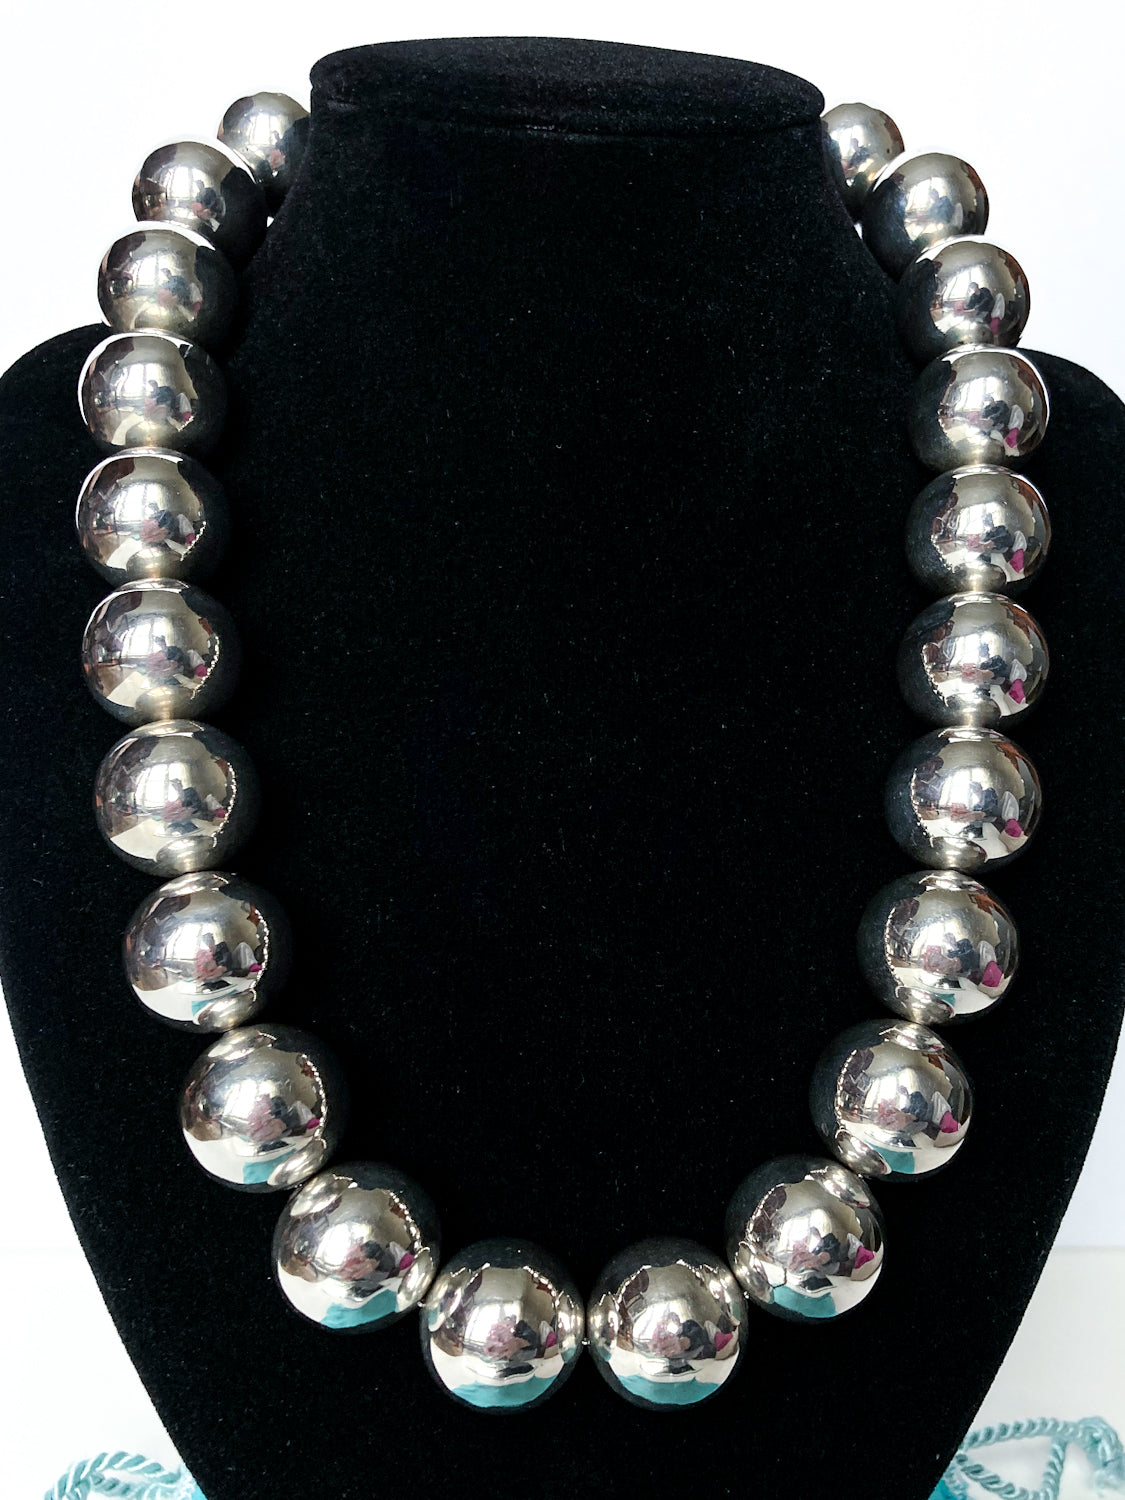 Tiffany & Co. Mexico Sterling Silver Large Orb Bead Statement Necklace